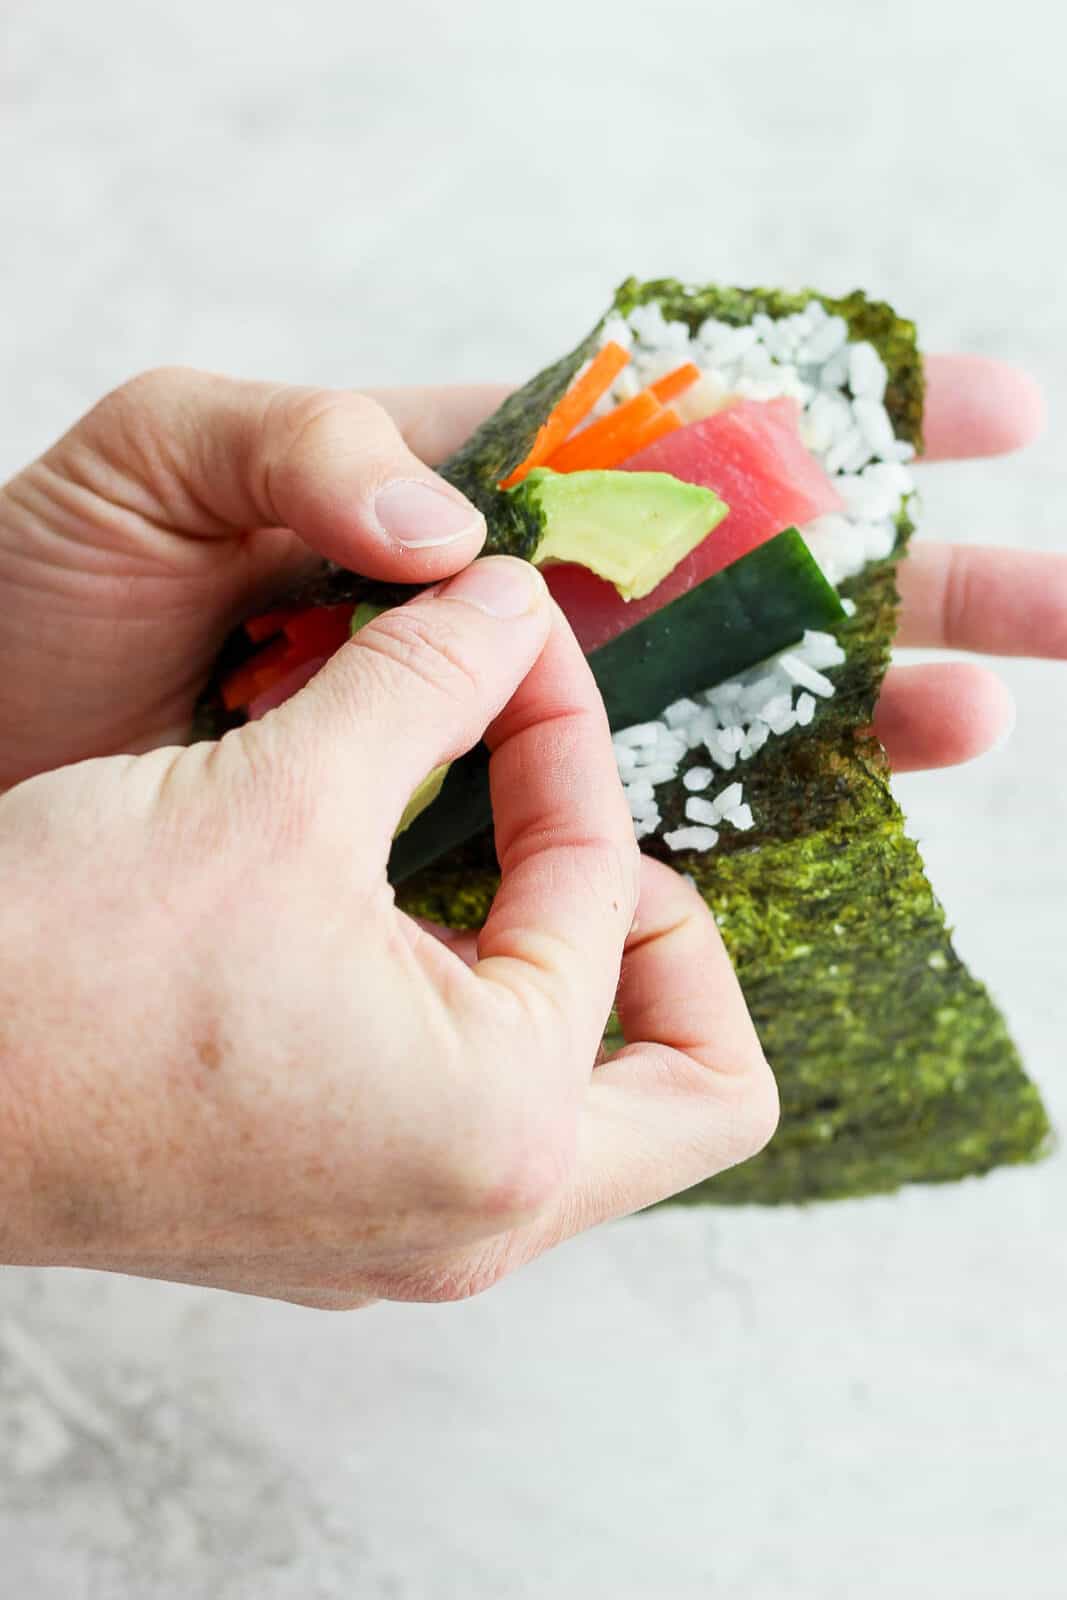 The nori sheet corner near the thumb being tucked across the filling ingredients.